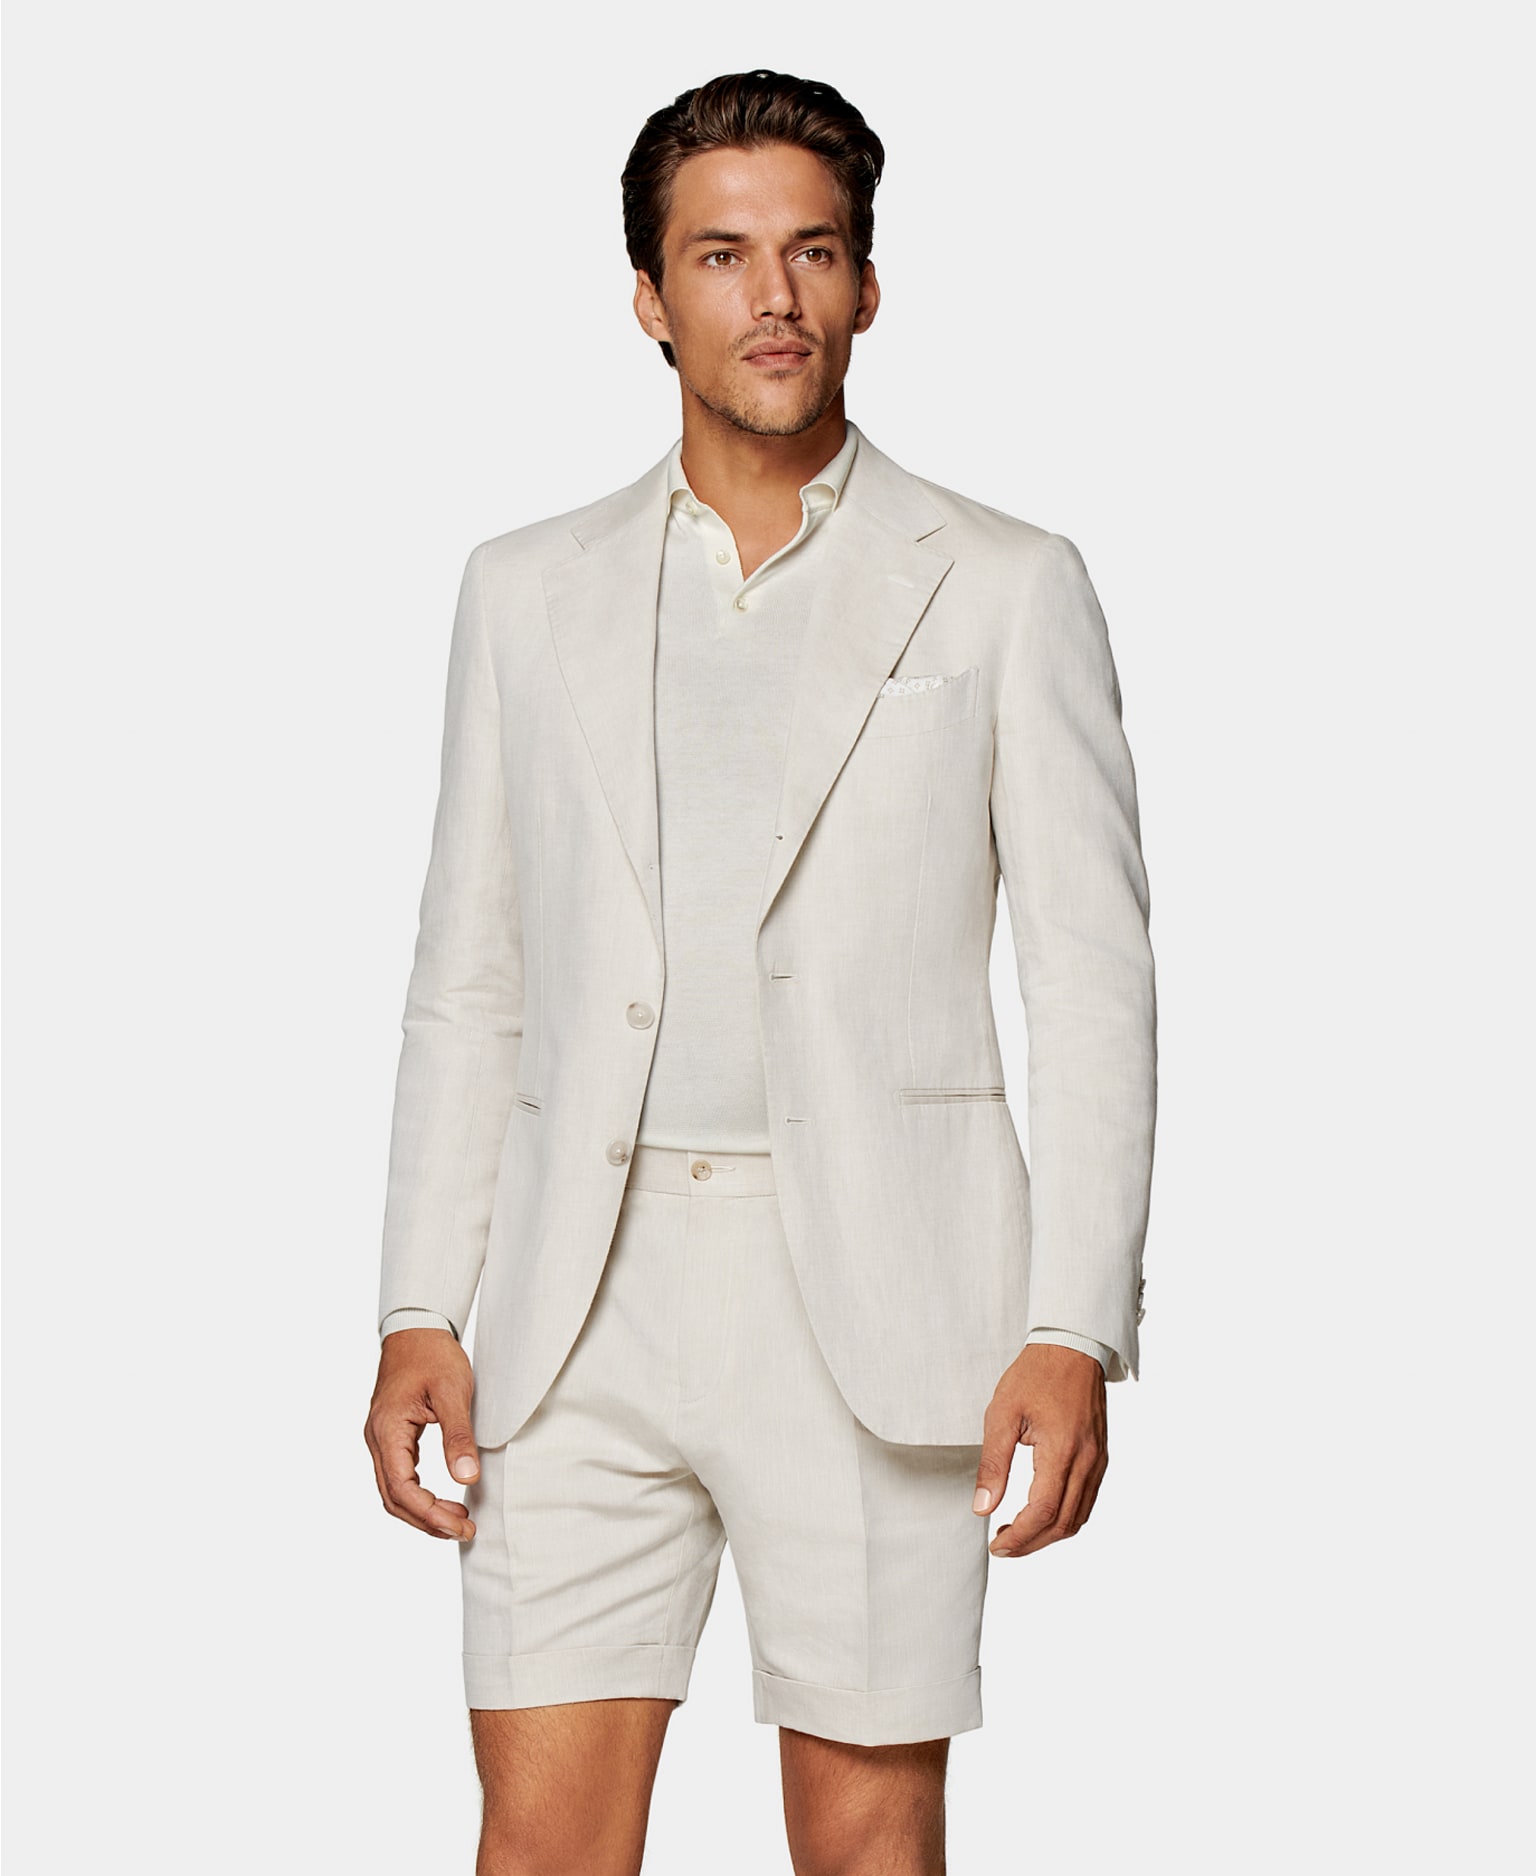 Casual Wedding Attire For Men | What To Wear | Suitsupply Us